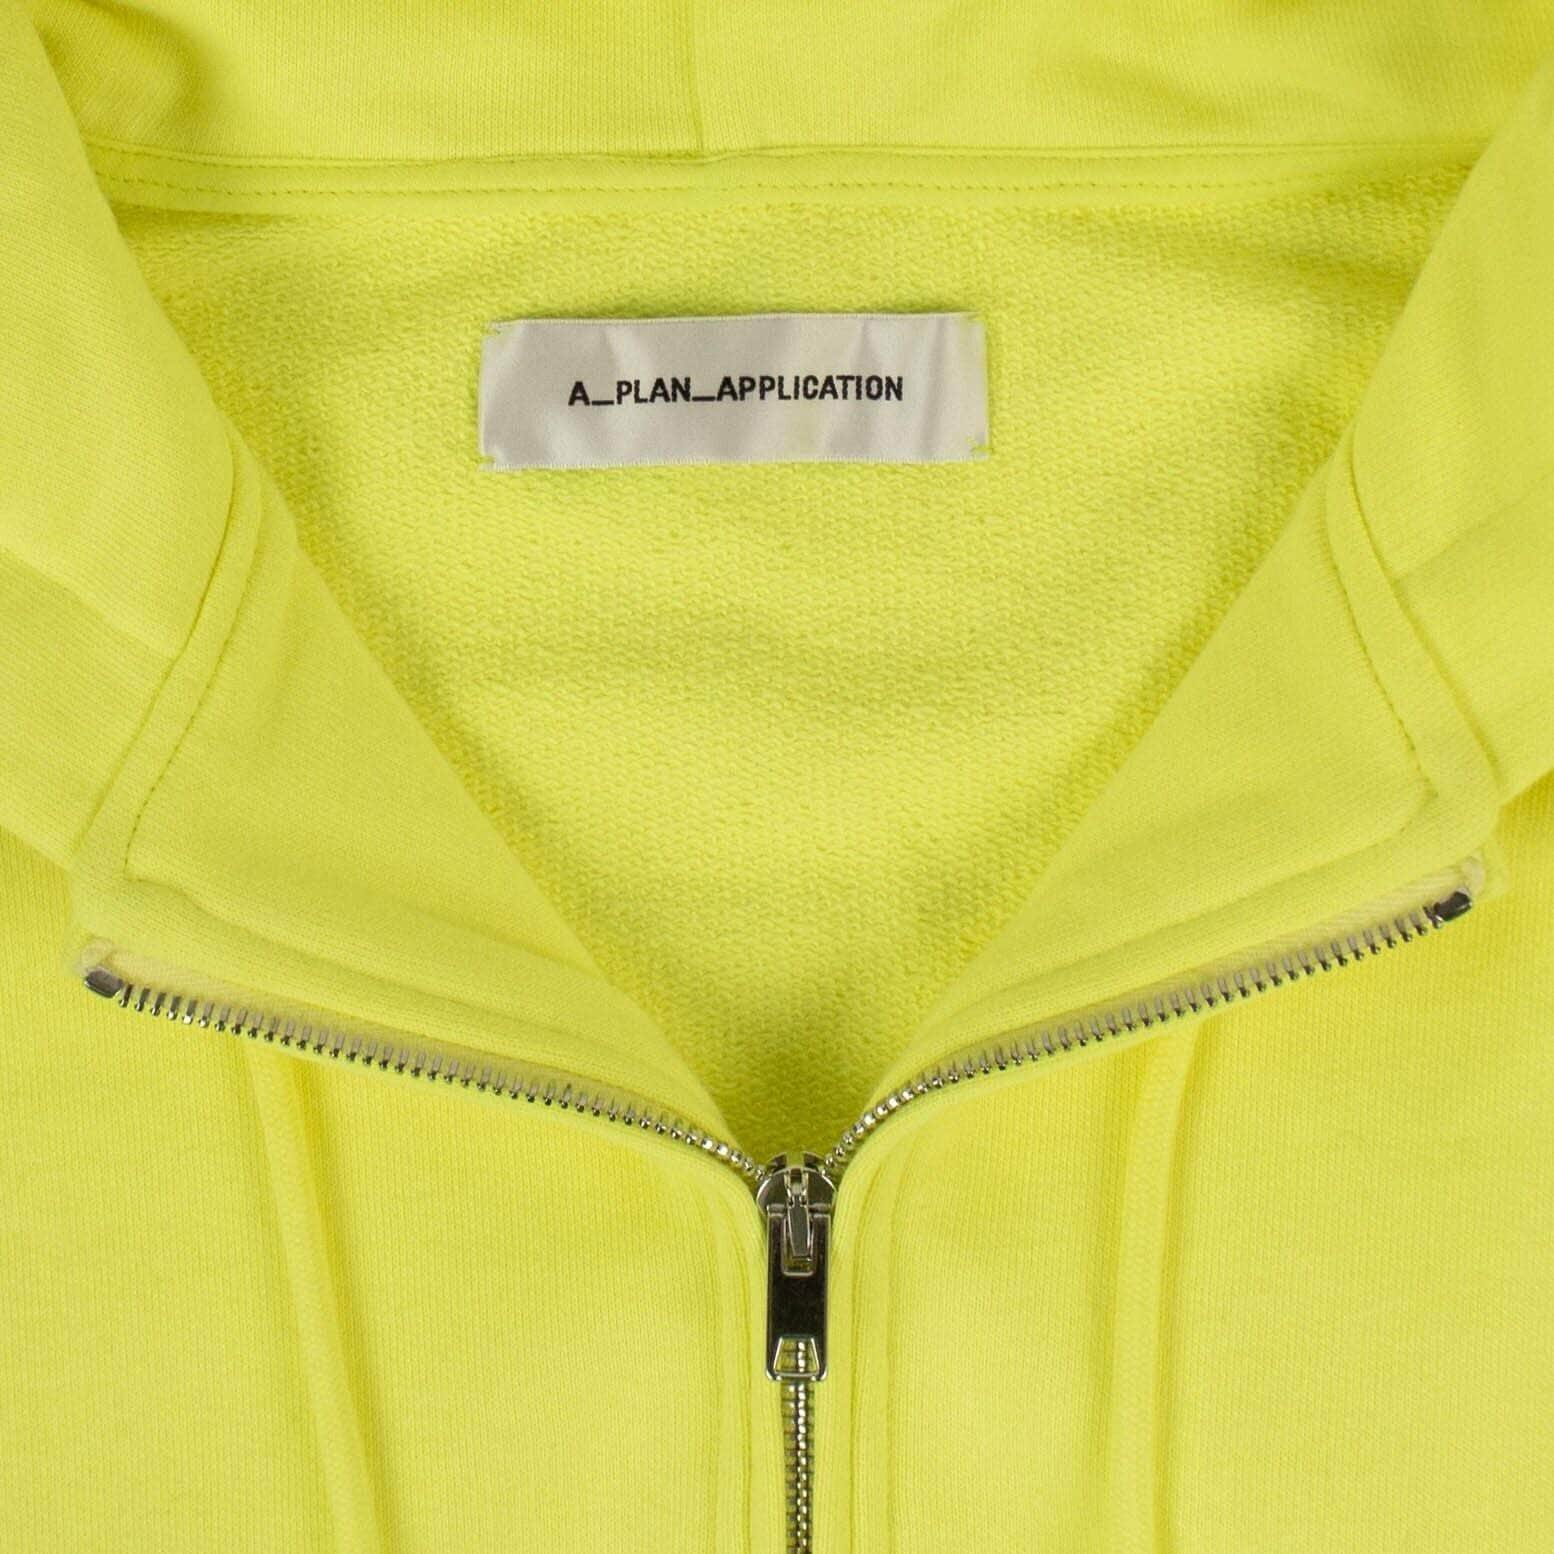 A_Plan_Application a_plan_application, couponcollection, gender-mens, main-clothing, mens-shoes, size-os, uncategorized, under-250 OS Neon Yellow Full Zip Sweatshirt JF6-AP-1004 JF6-AP-1004